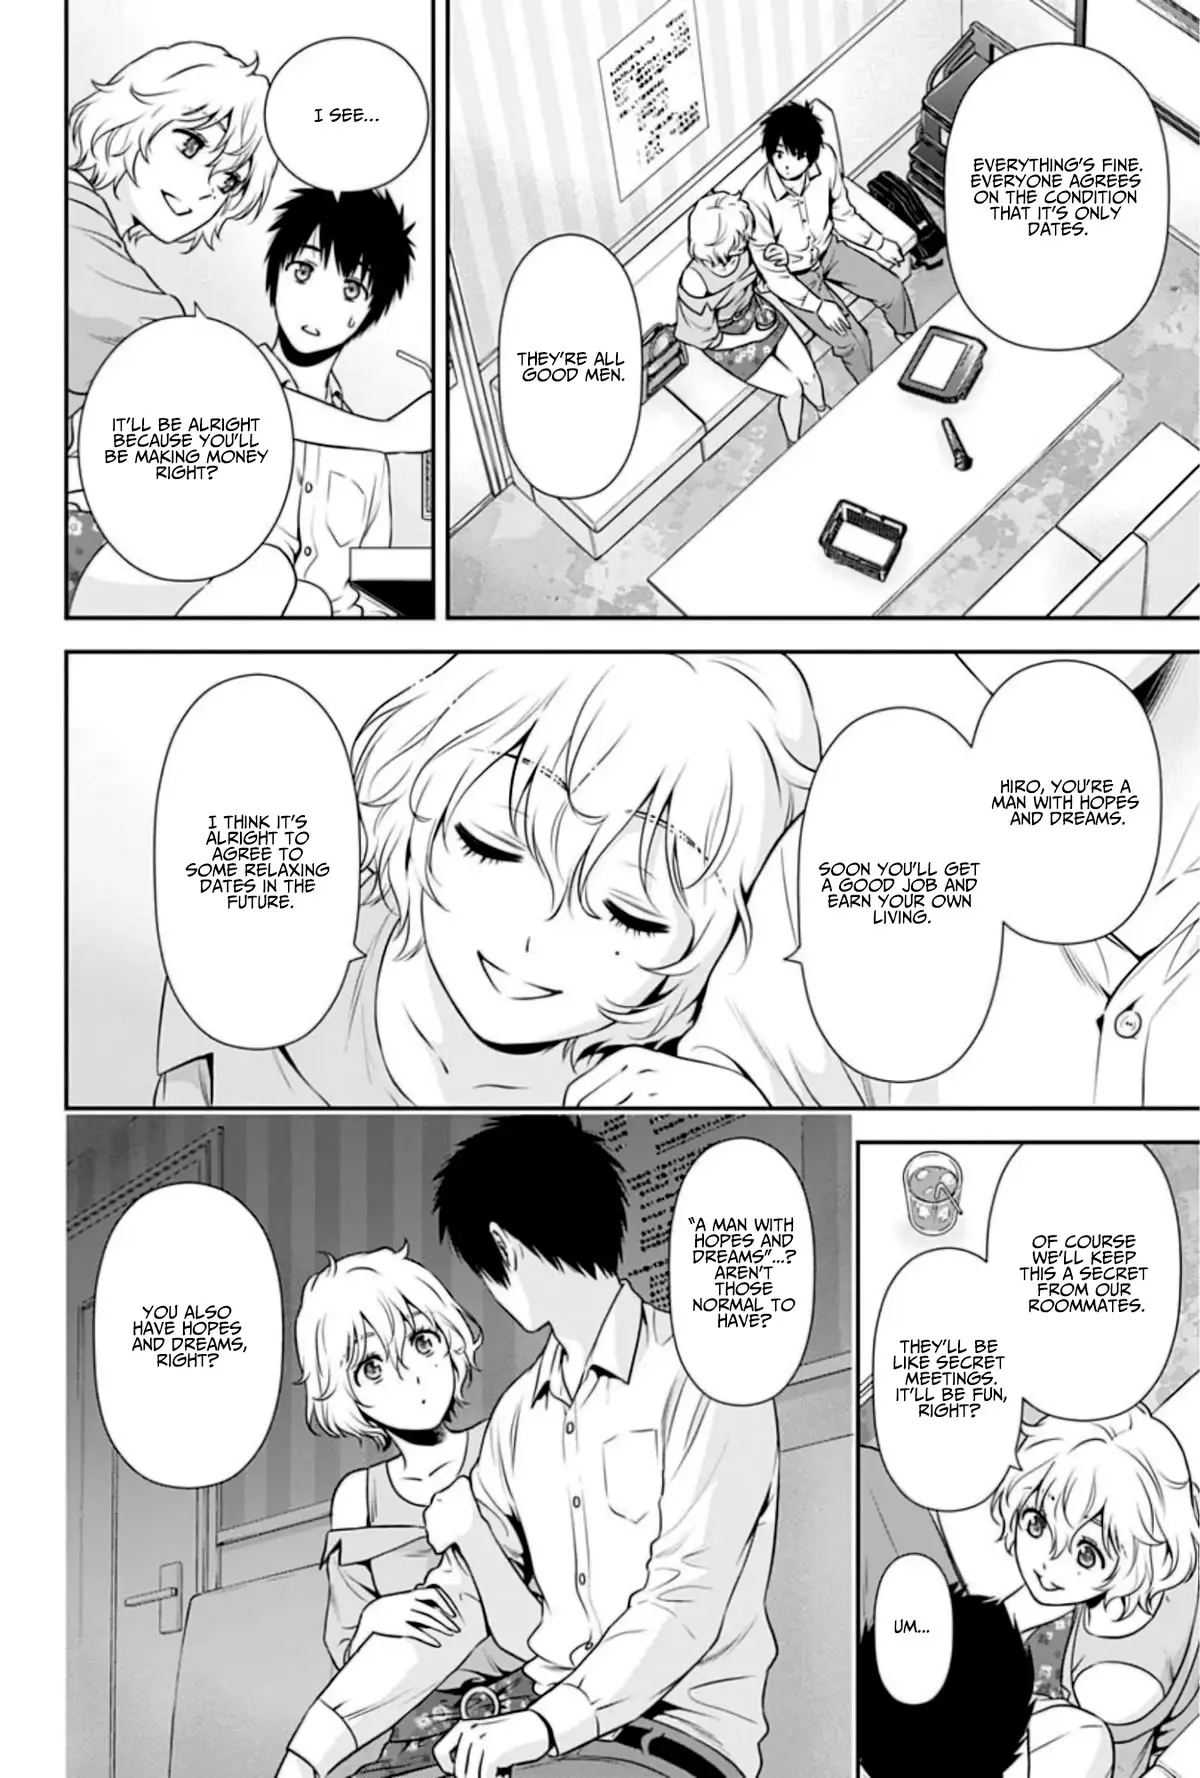 Can I Live With You? - 4 page 12-8817b926